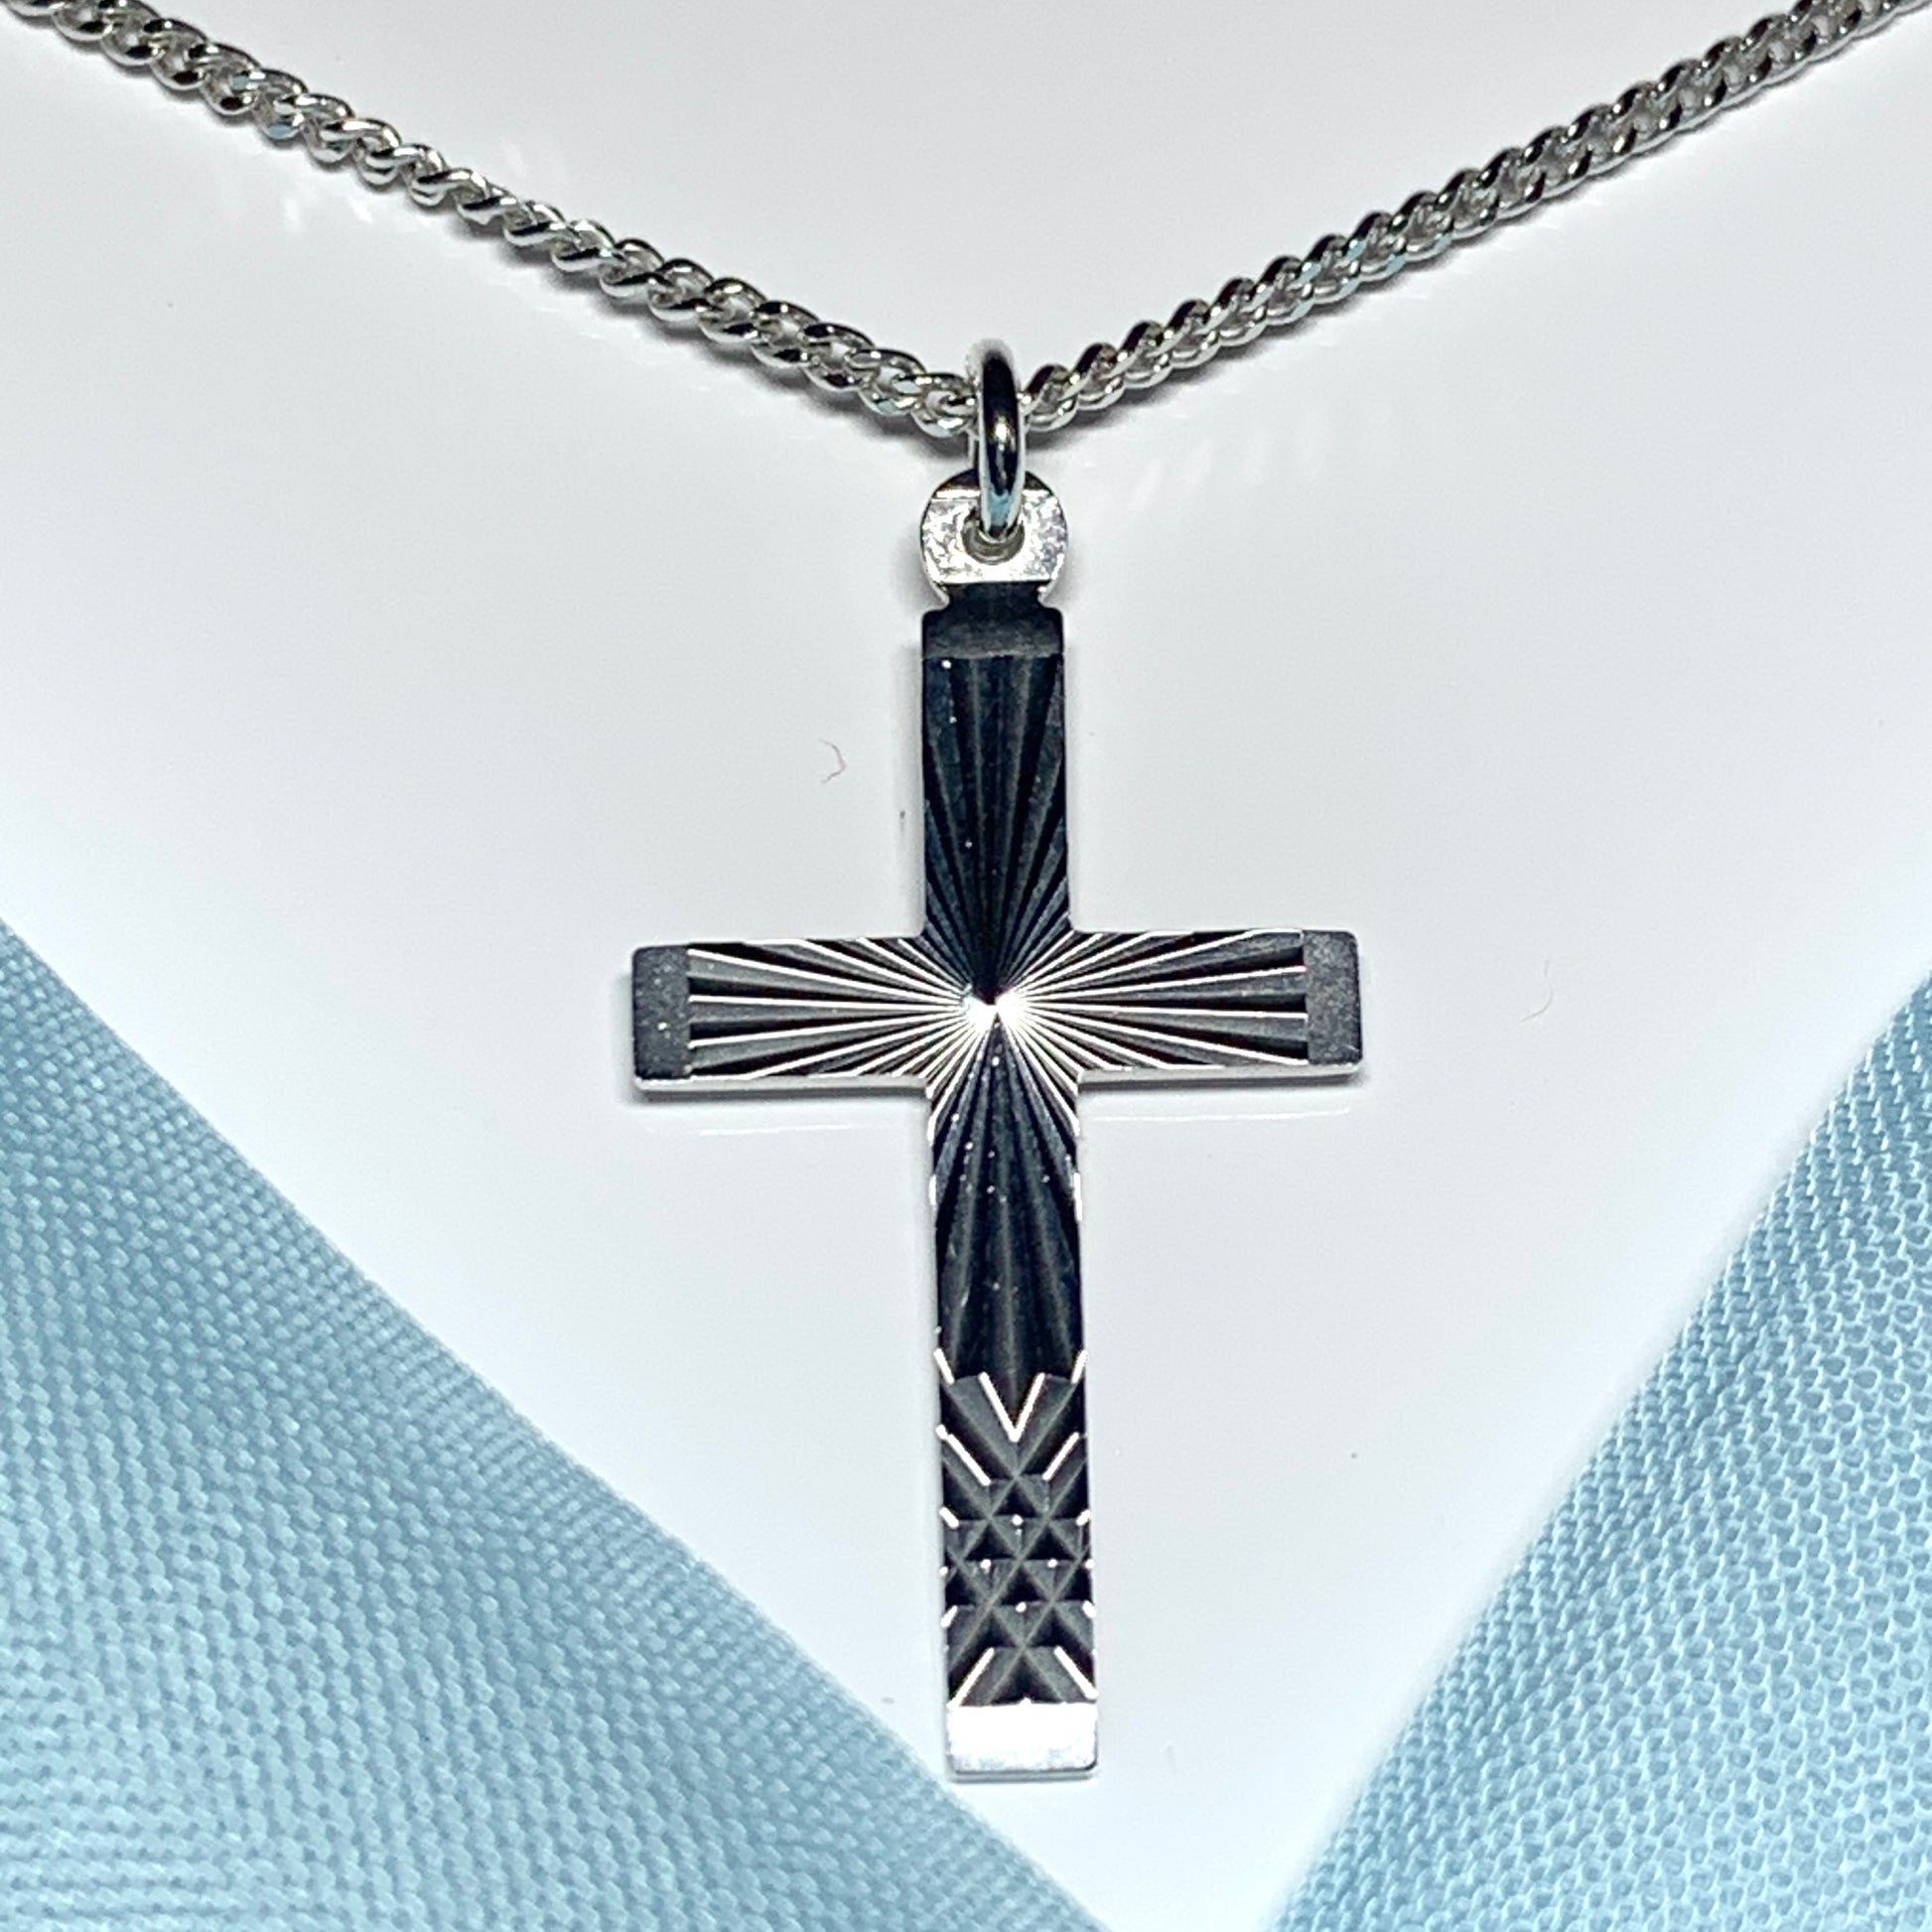 Solid cross patterned sterling silver diamond cut including chain